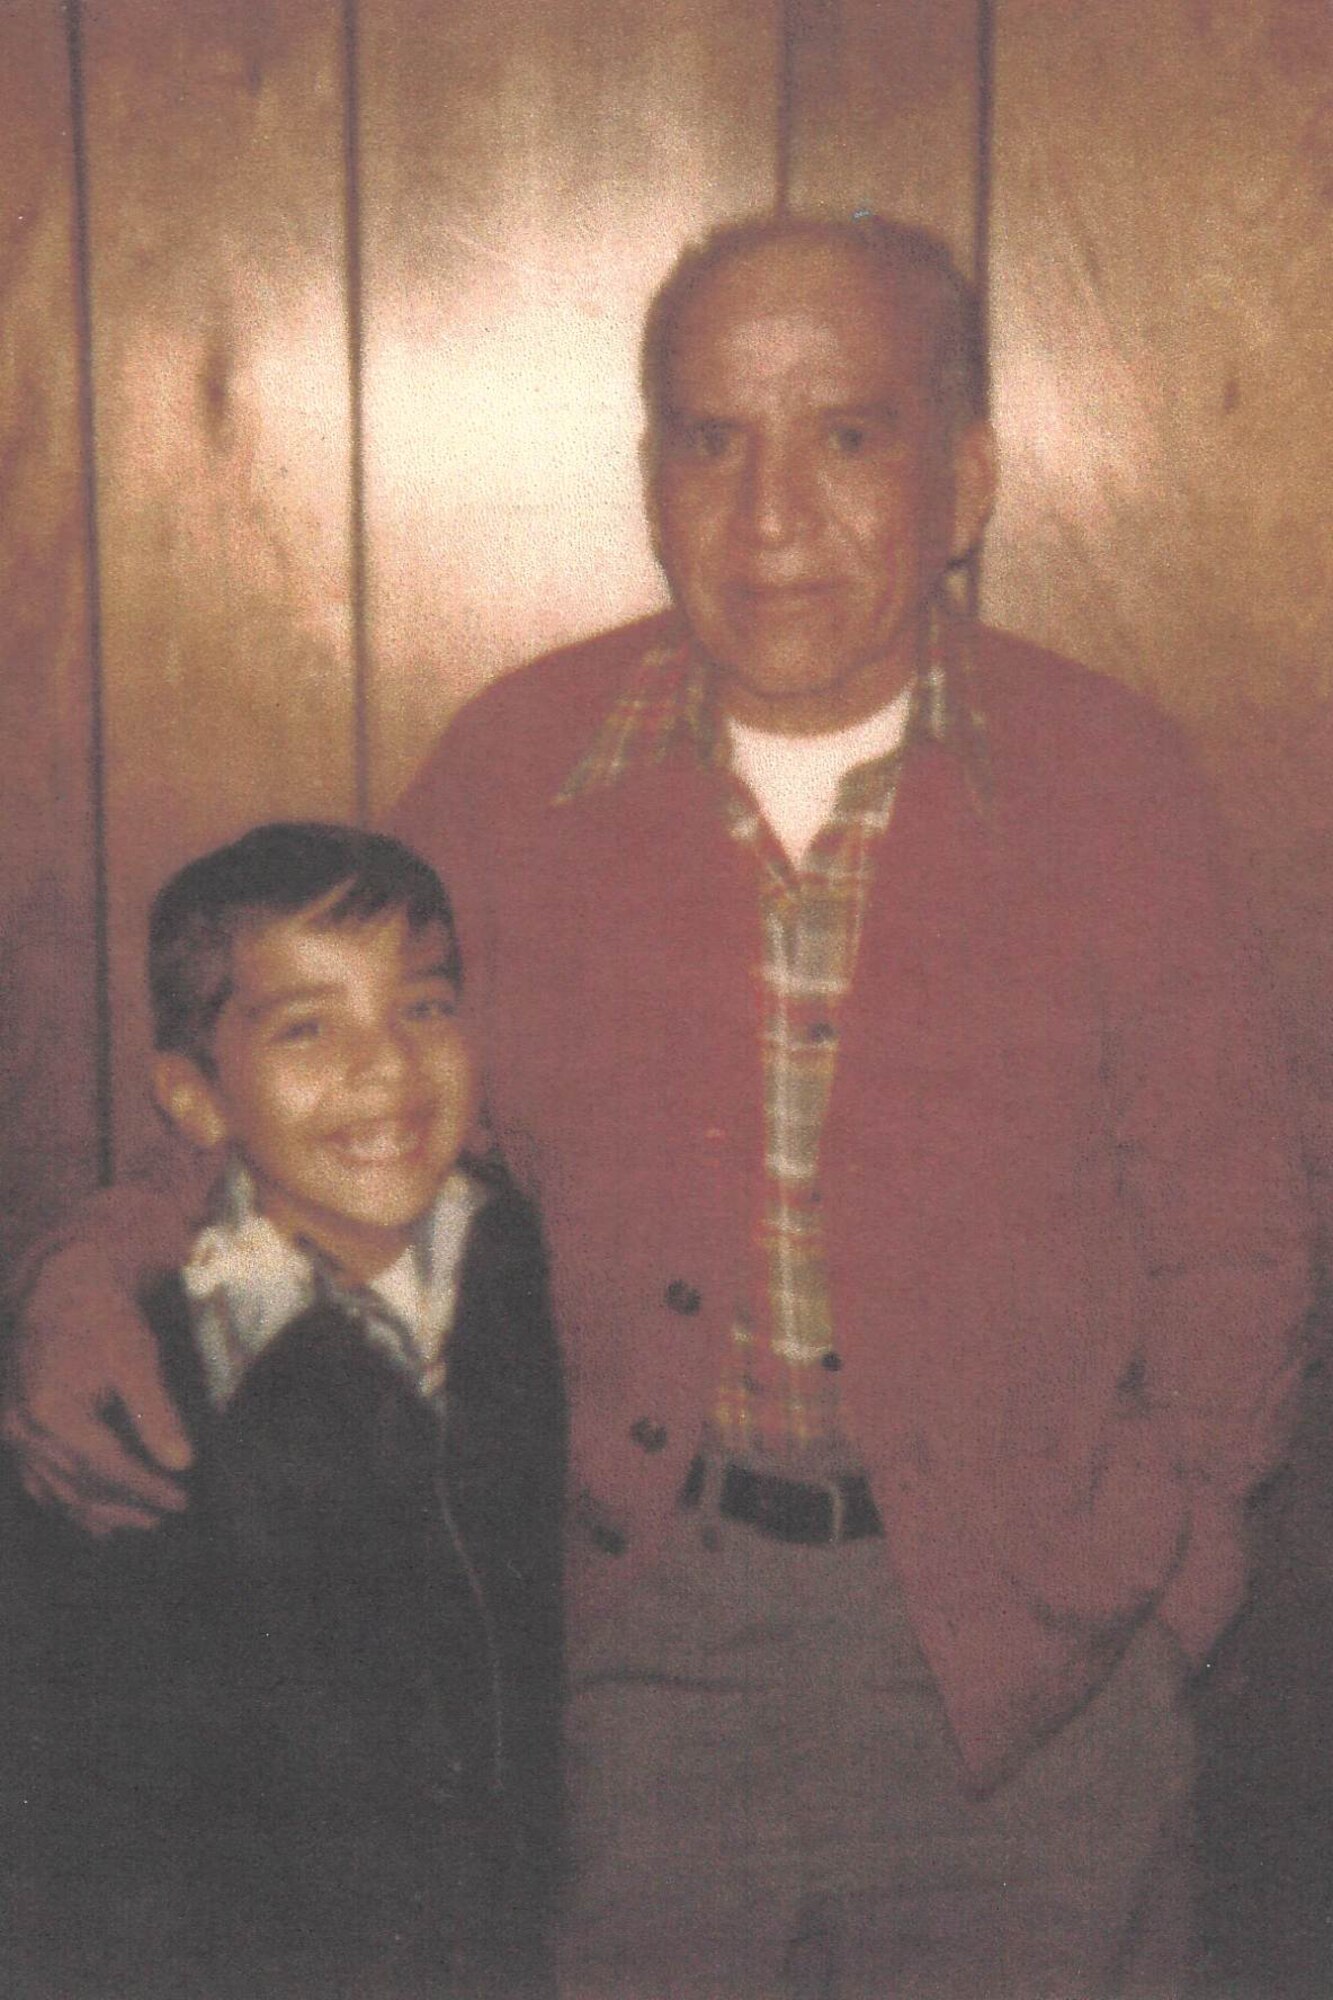 Chief Master Sgt. Joe S. Gonzalez, Jr. with his father, Joe S. Gonzalez, who was born in Mexico on or about Aug. 12, 1912, in a small village near Puruándiro, Michoacán, Mexico, southwest of Mexico City. “In 1930, he migrated to the United States,” said Gonzalez, Jr. “He was a veteran and remembered the attack on Pearl Harbor. That attack impacted him so much that he told me he wanted to be part of something bigger than himself. Ironically, following that, he was drafted into the U.S. Army in 1944.” (Courtesy Photo)